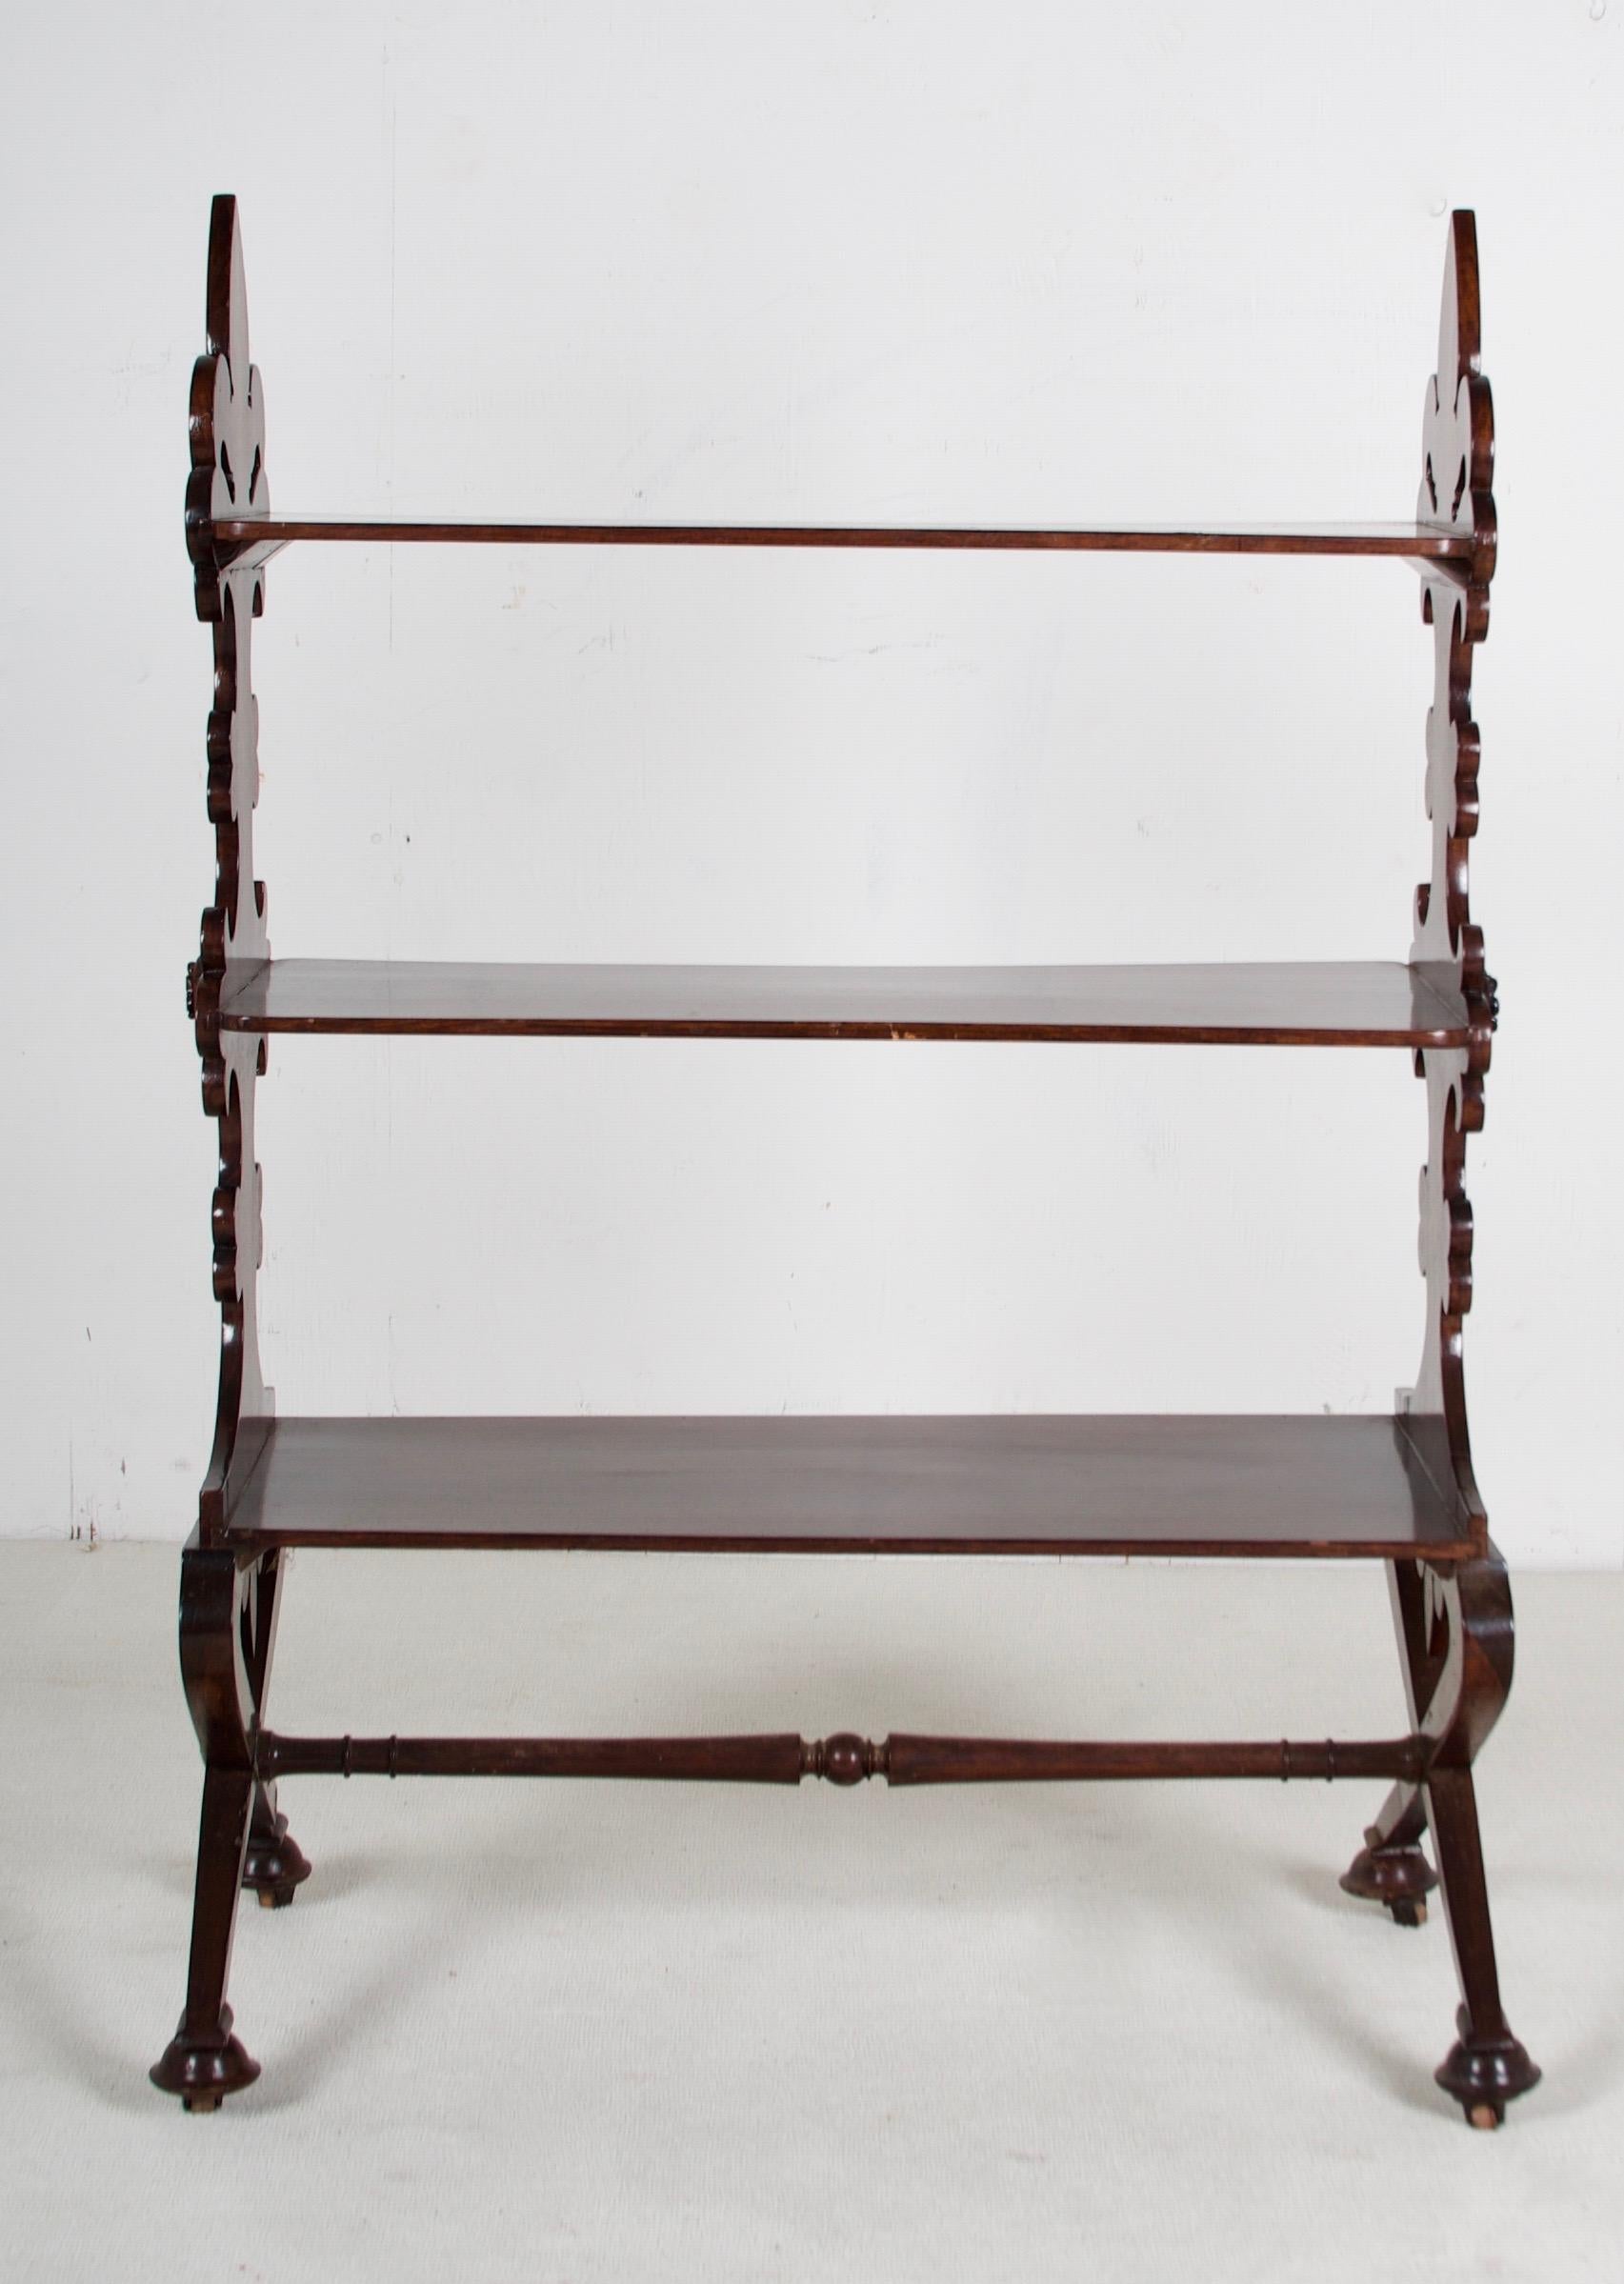 A lovely, Fleur d Lis decorated mahogany Etagere with X style supports on casters.
The craftsmanship is quite fine and well detailed. 
Belle Epoque, 